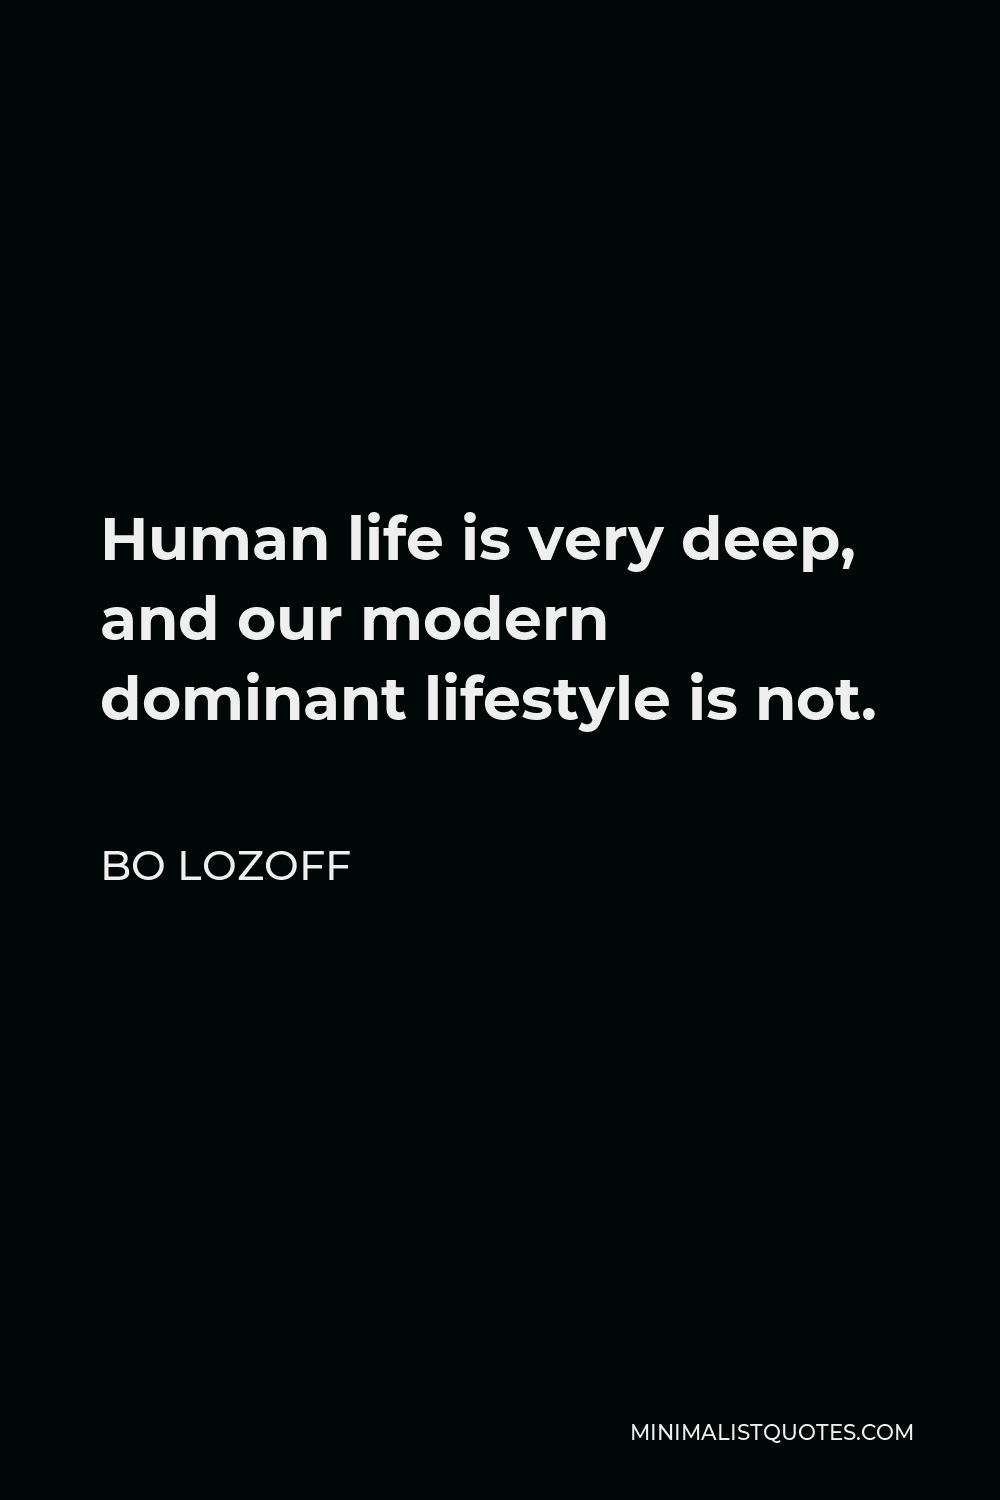 Bo Lozoff Quote - Human life is very deep, and our modern dominant lifestyle is not.